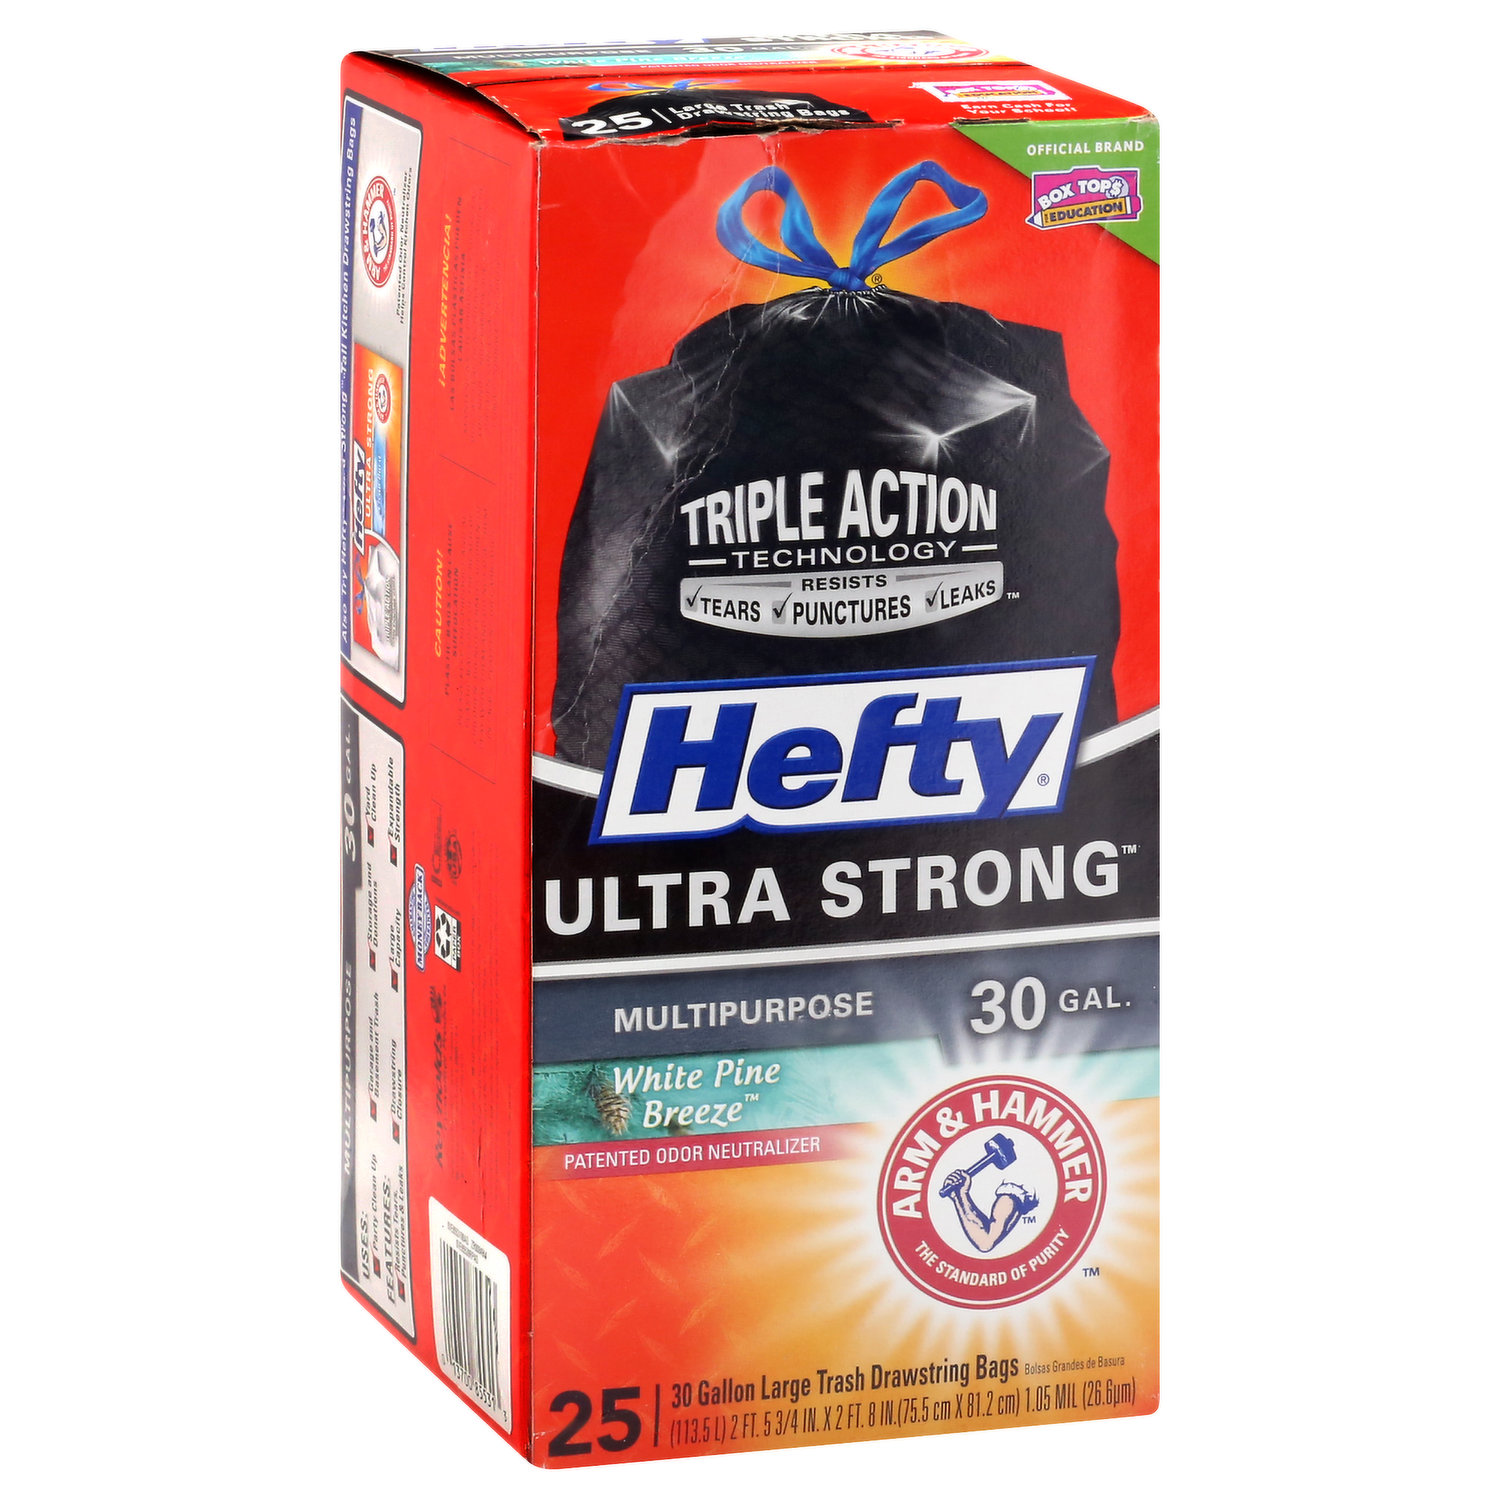 Hefty Steel Sak Clean-Up Bags, Drawstring, Heavy Duty, Extra Large, 39 Gallon - 28 bags